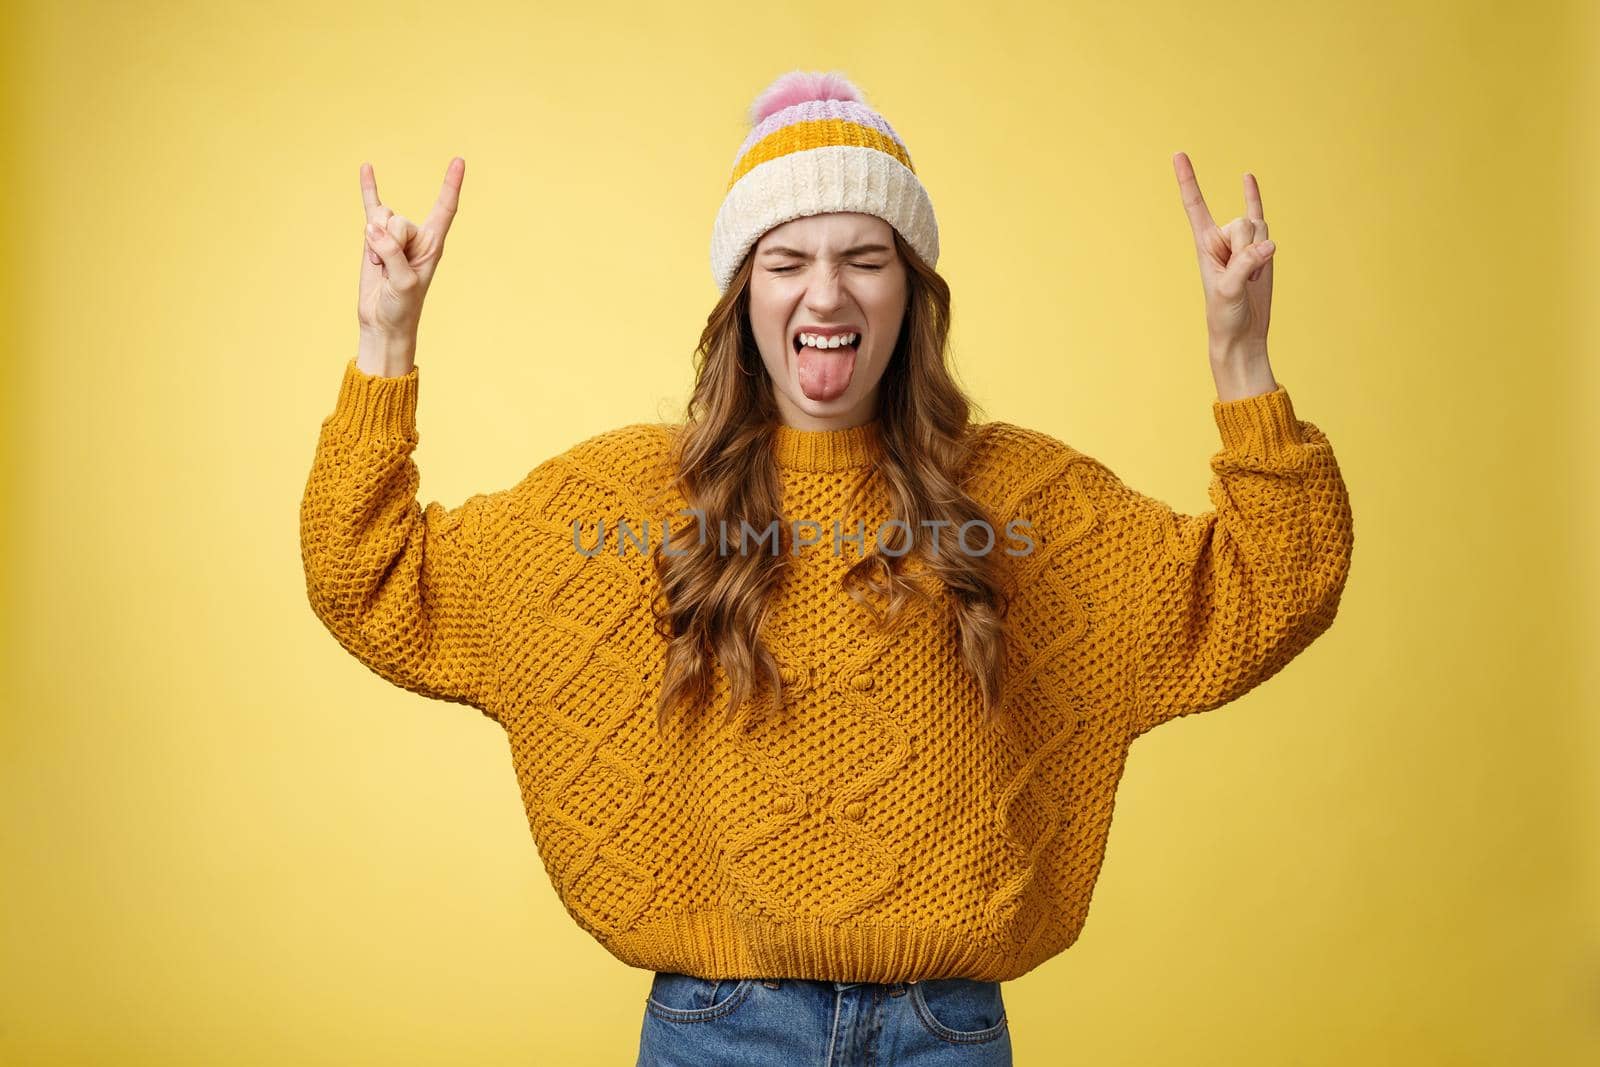 Awesome party rocks. Portrait amused carefree good-looking stylish girl having fun dancing dance floor heavy metal concert show rock-n-roll gesture show tongue rebellious close eyes enjoying music.